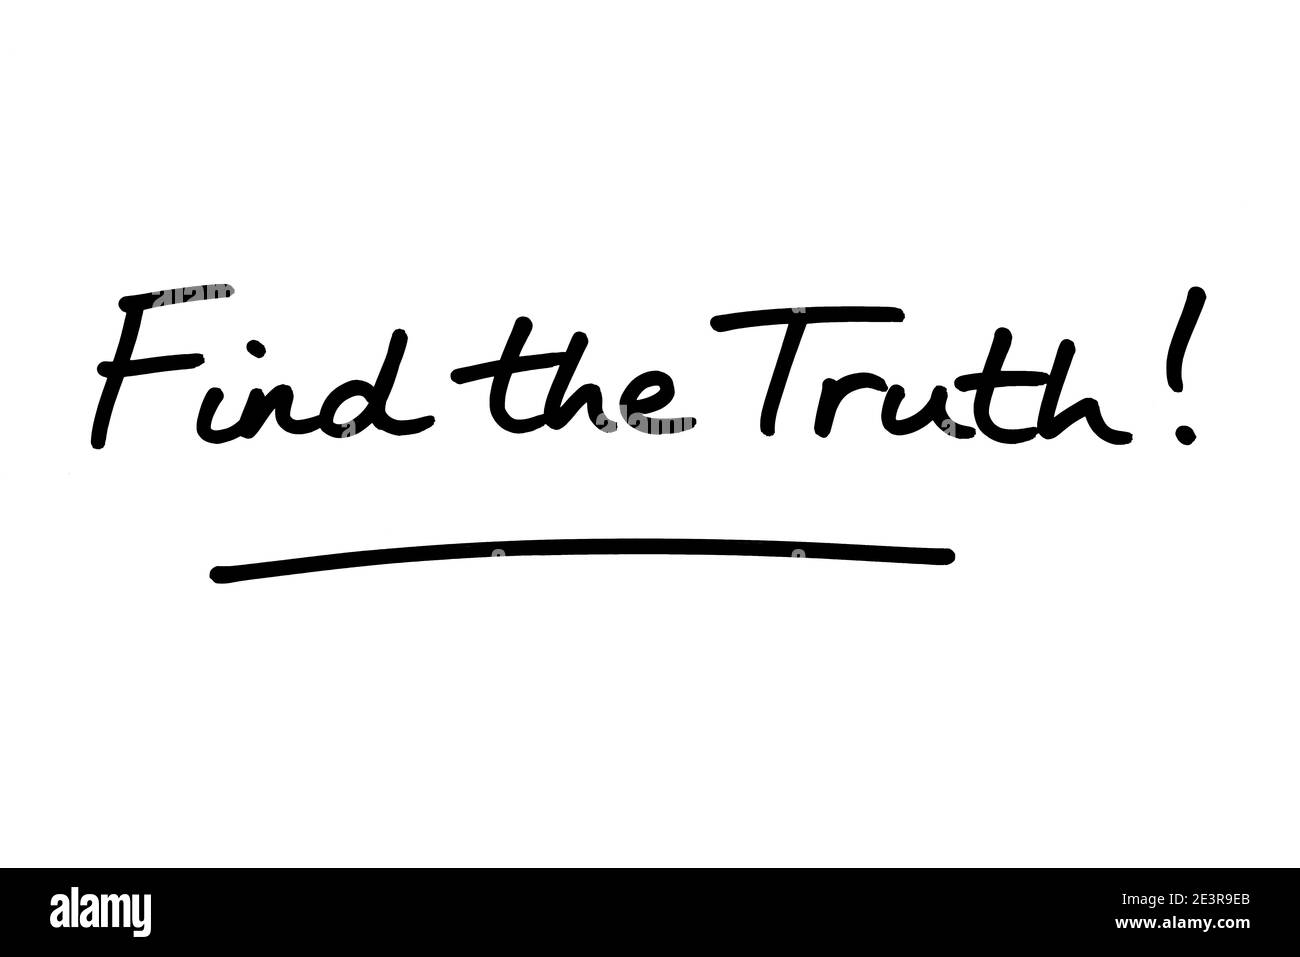 Find the Truth! handwritten on a white background. Stock Photo